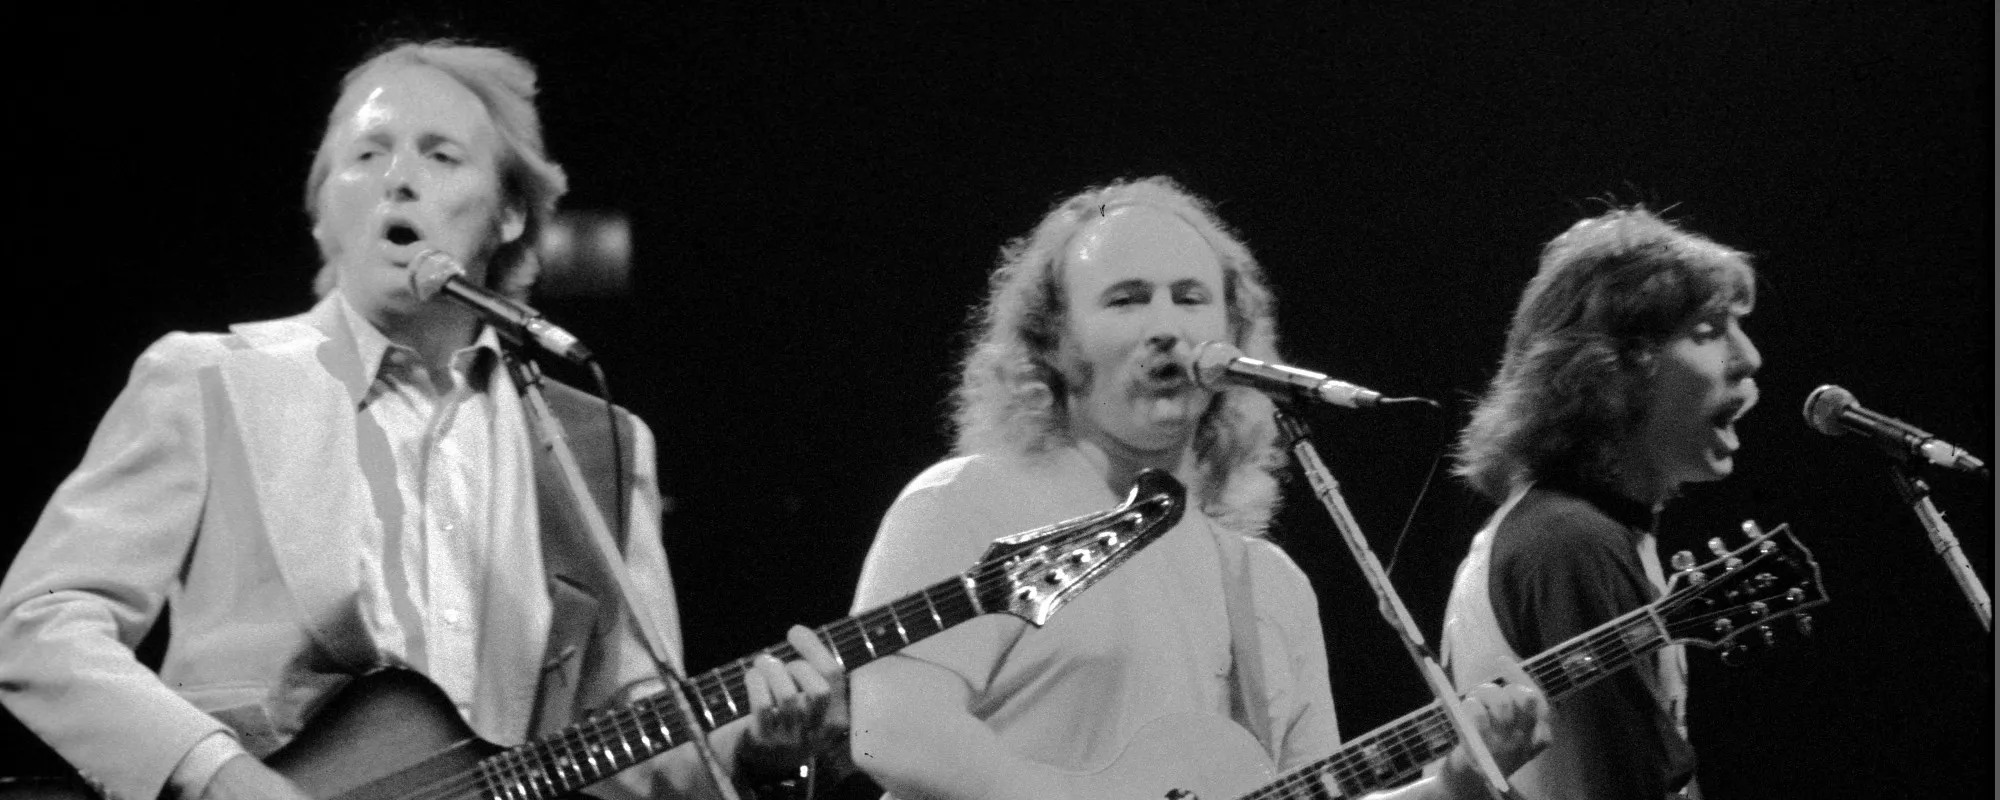 The Origins of the Iconic Trio Crosby Stills and Nash